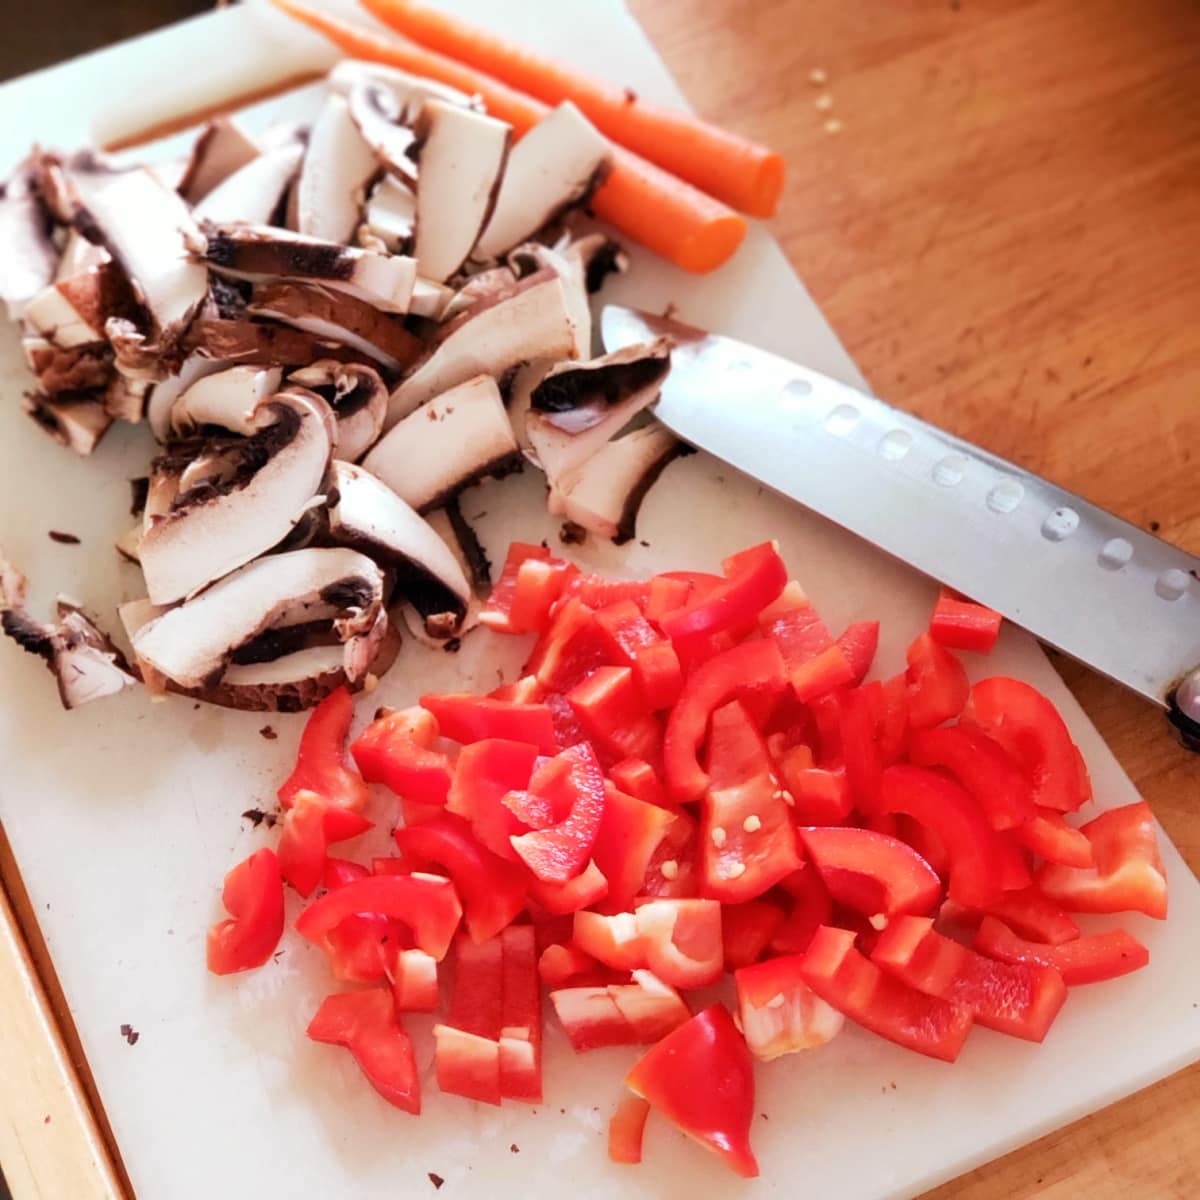 Chop mushrooms and red pepper on a white cutting board